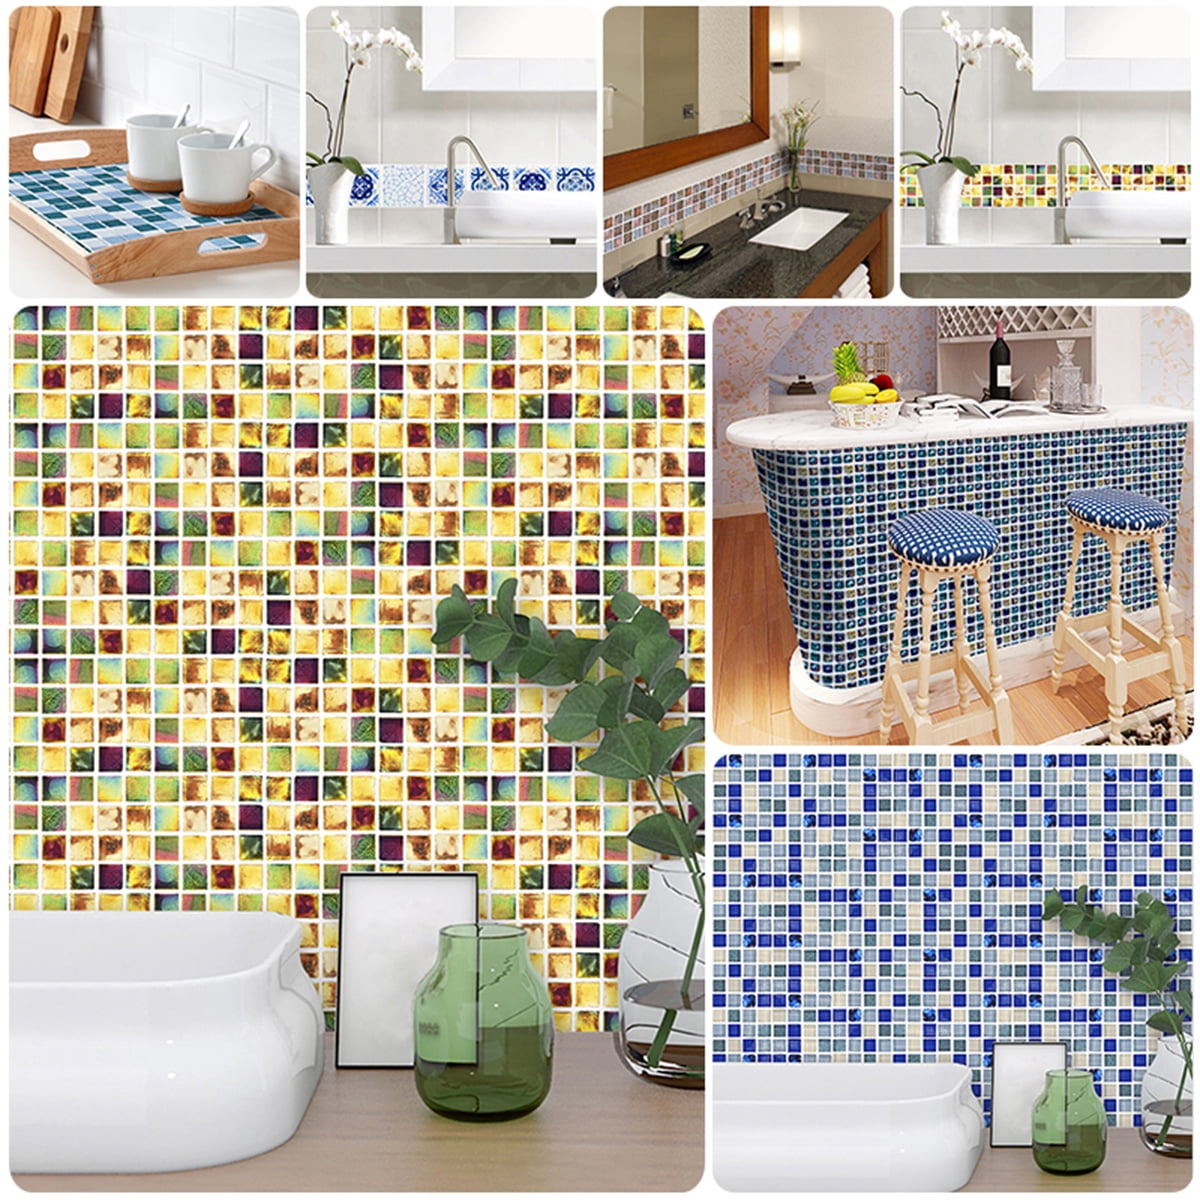 18pcs 3D Wall Stickers Self-Adhesive Mosaic Tile Stickers Kitchen Bathroom Decor 